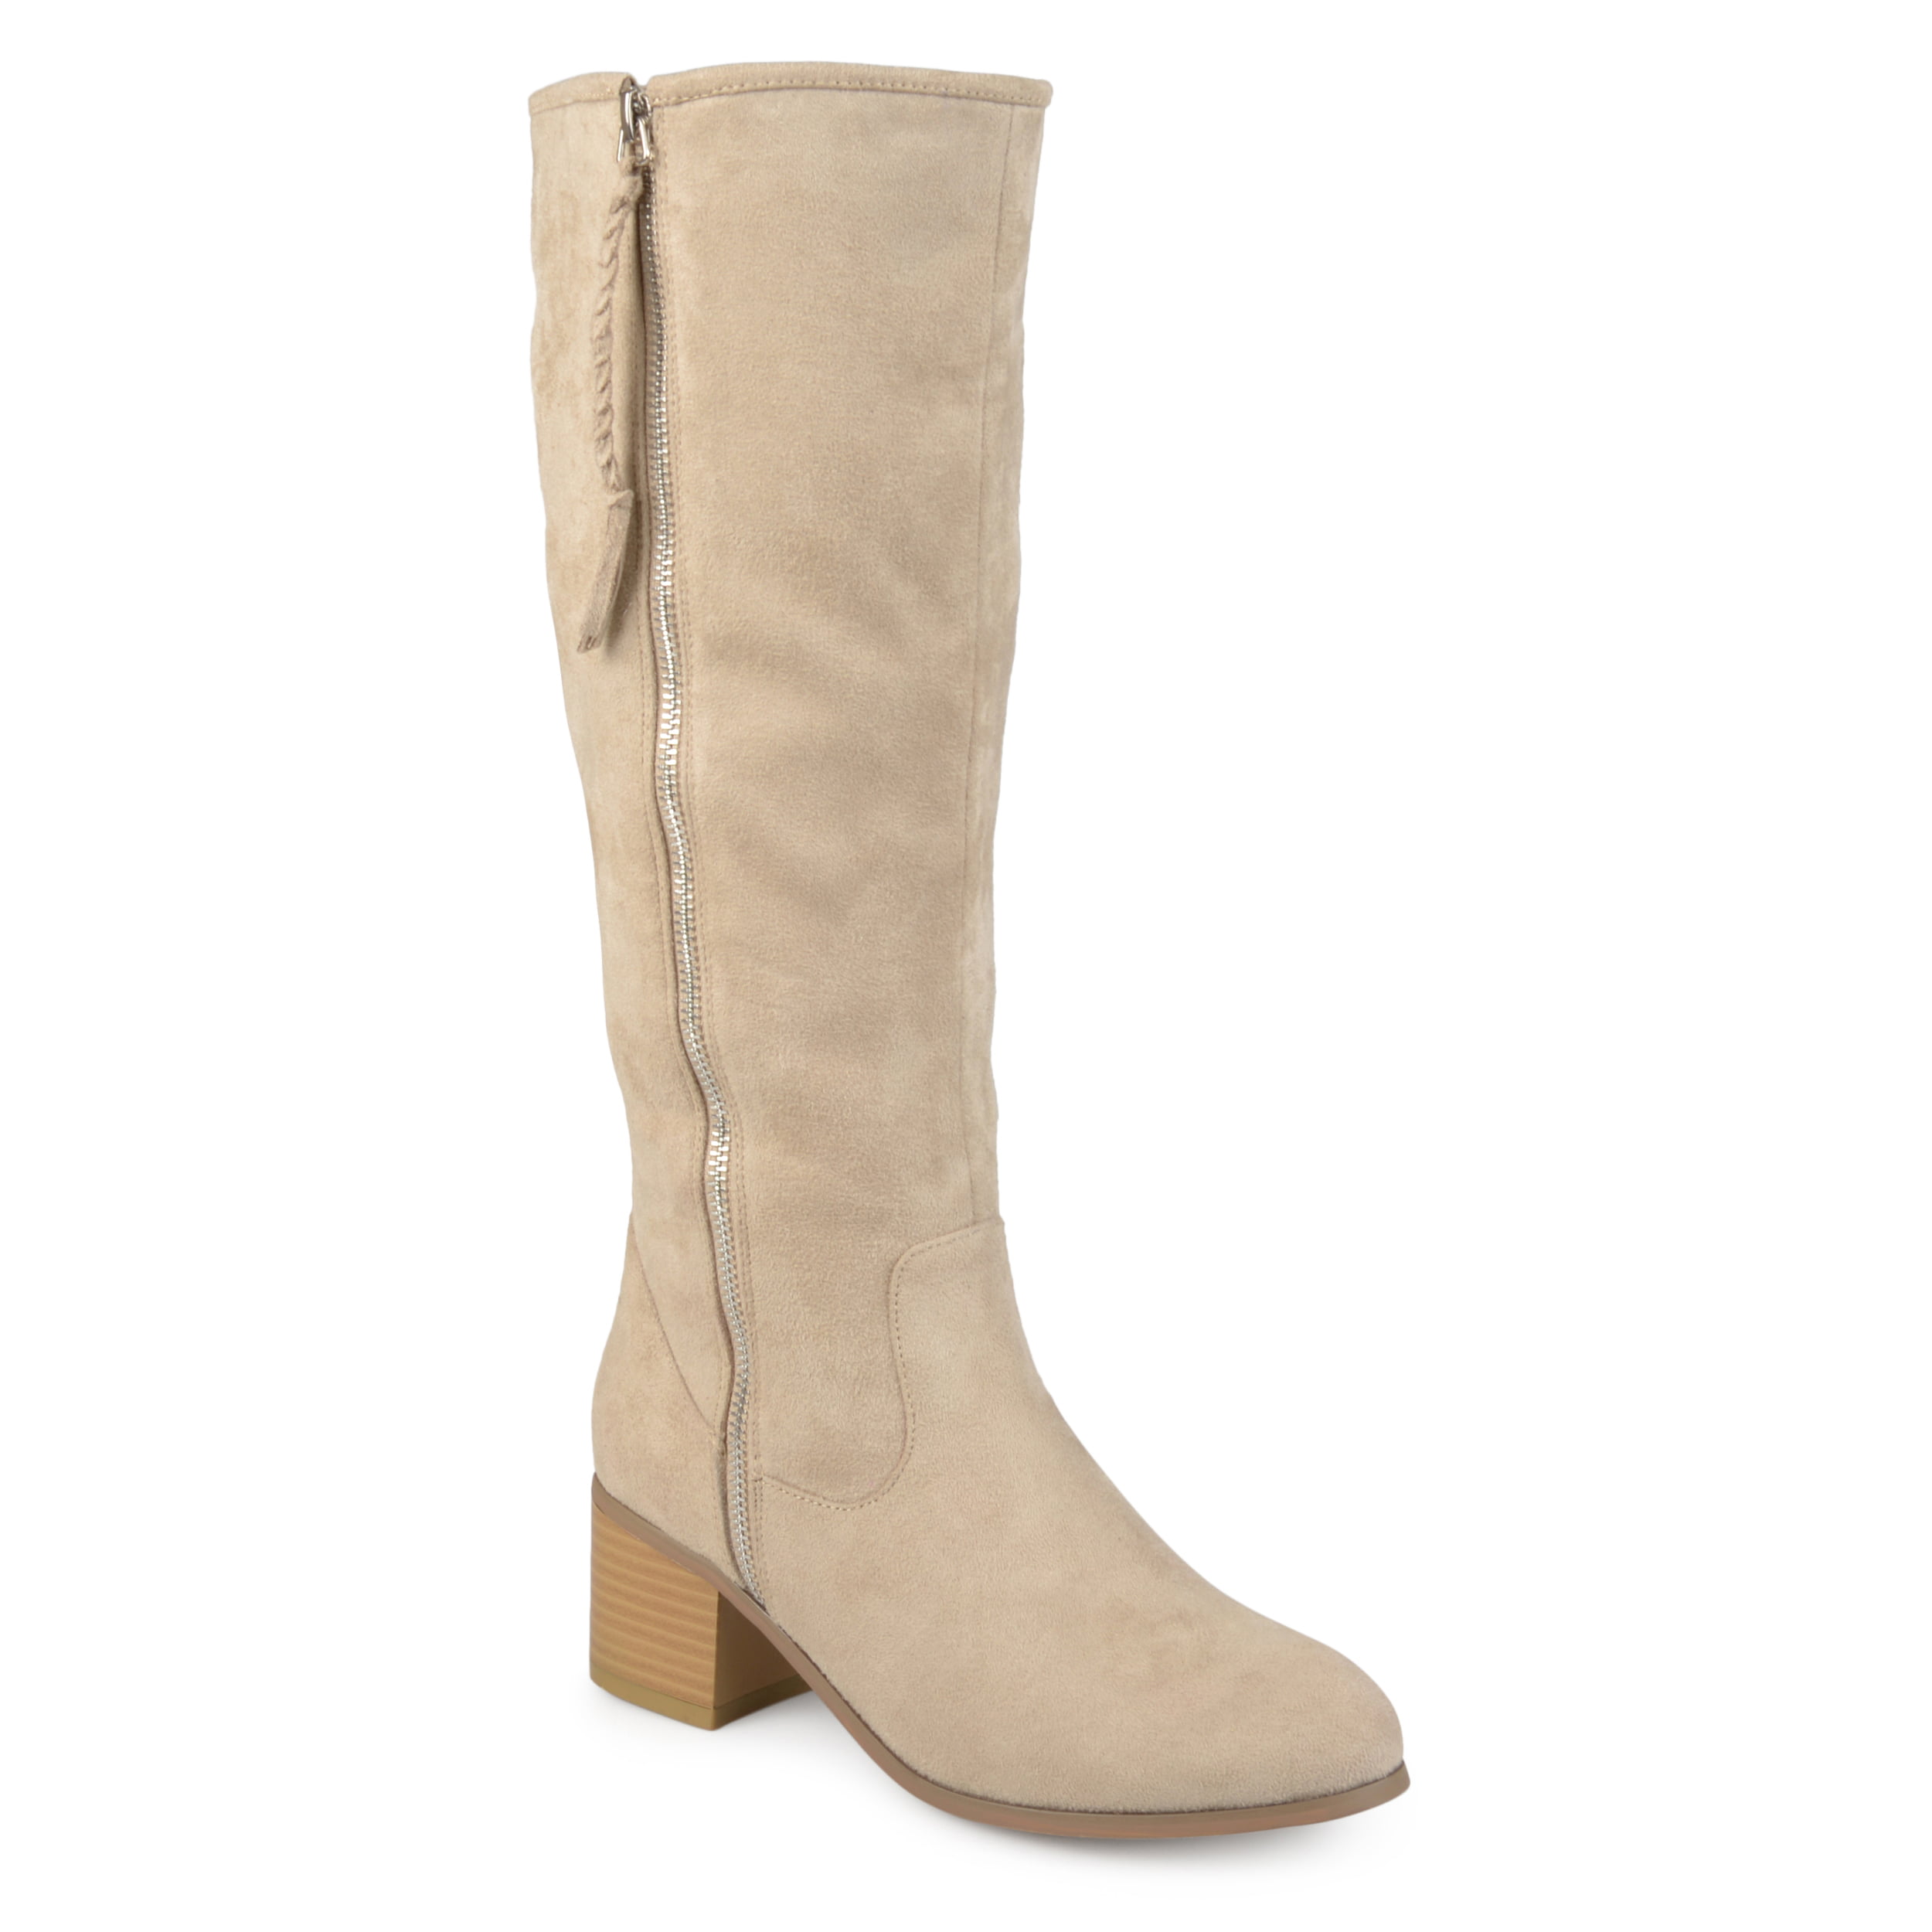 Brinley Co. - Womens Wide Calf Faux Suede Mid-calf Stacked Wood Heel